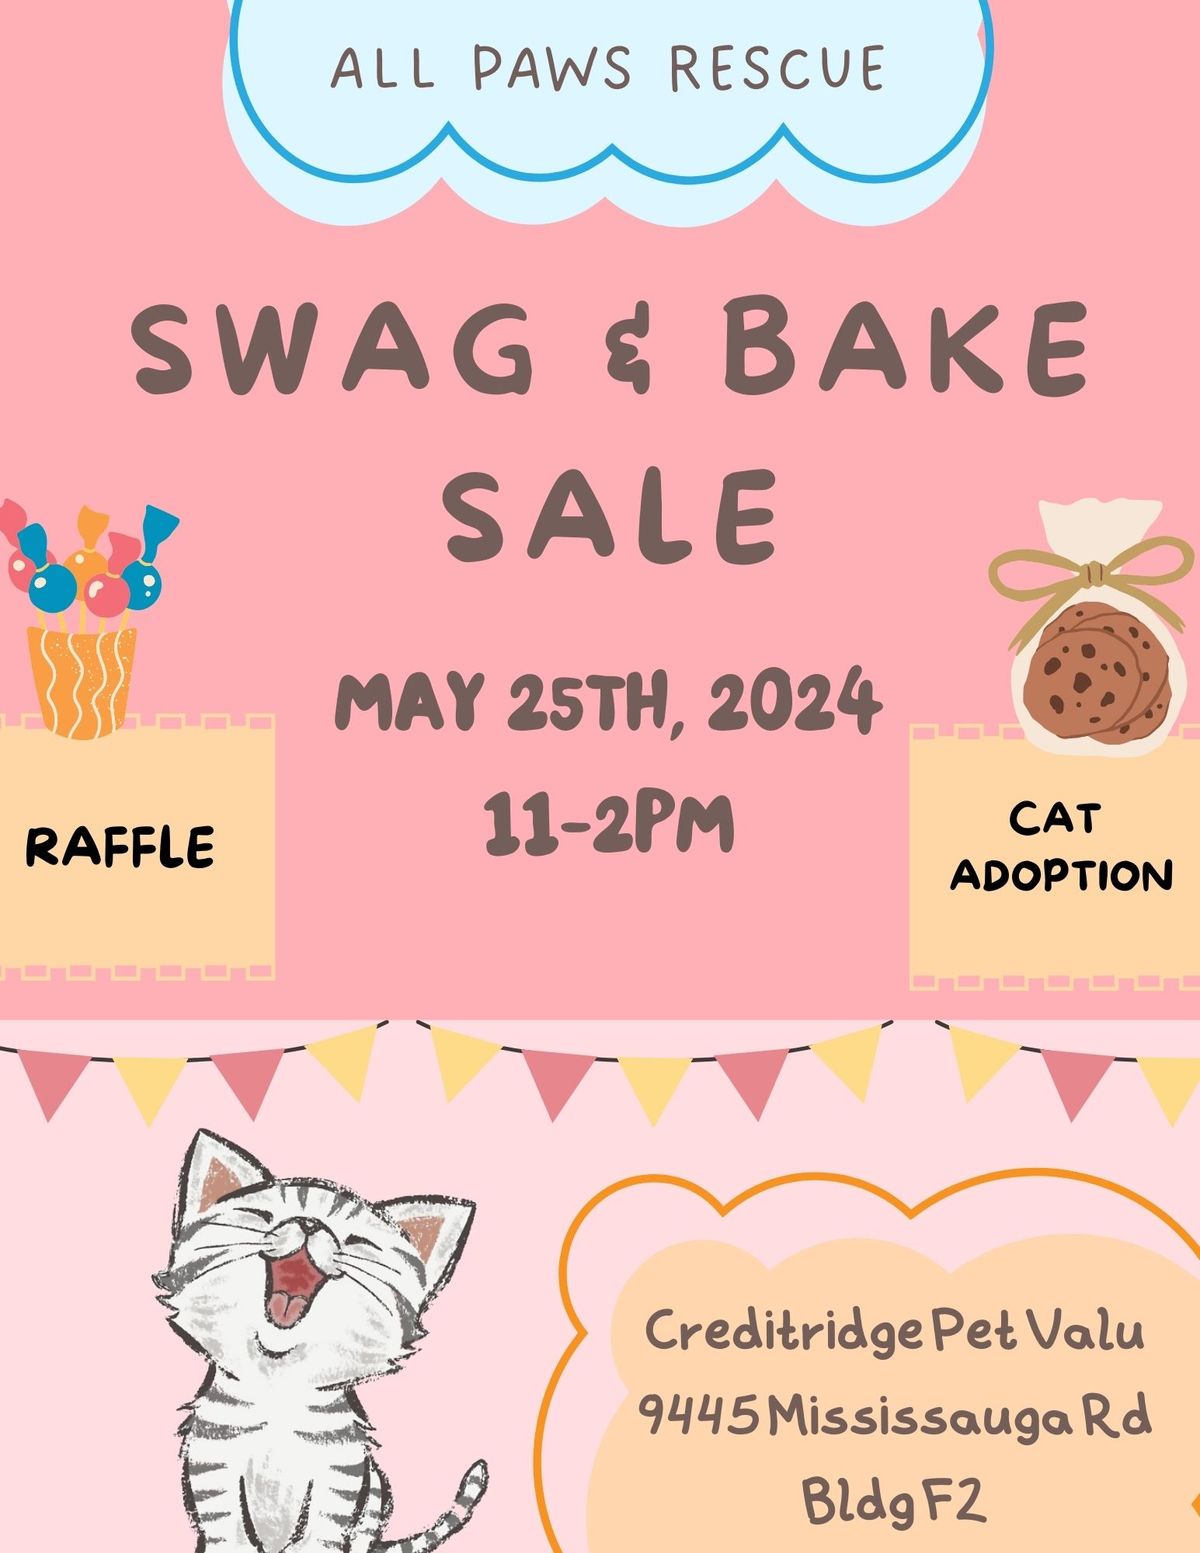 ALL PAWS RESCUE SWAG & BAKE SALE